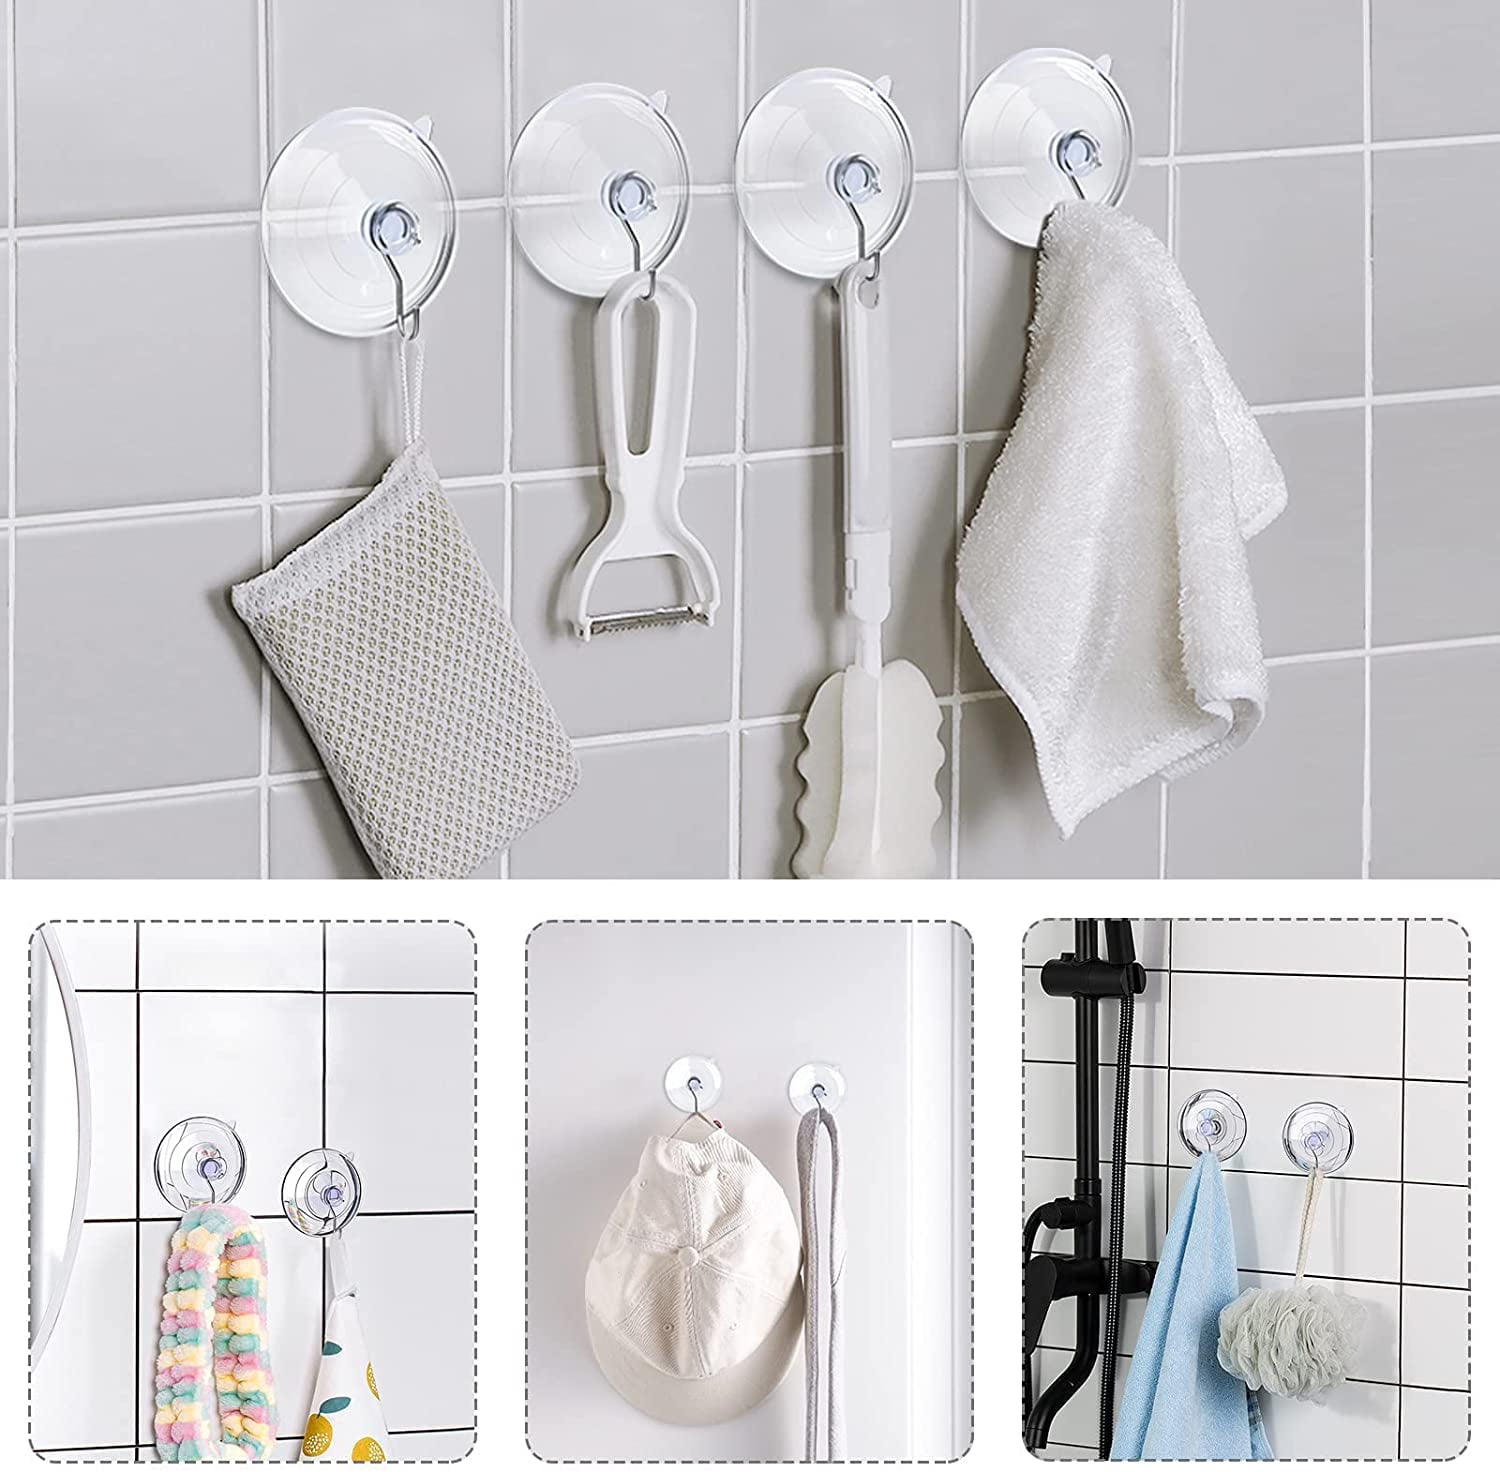 Vacuum Rubber Suction Cup Holder Wall Hook Bathroom Soap Holder